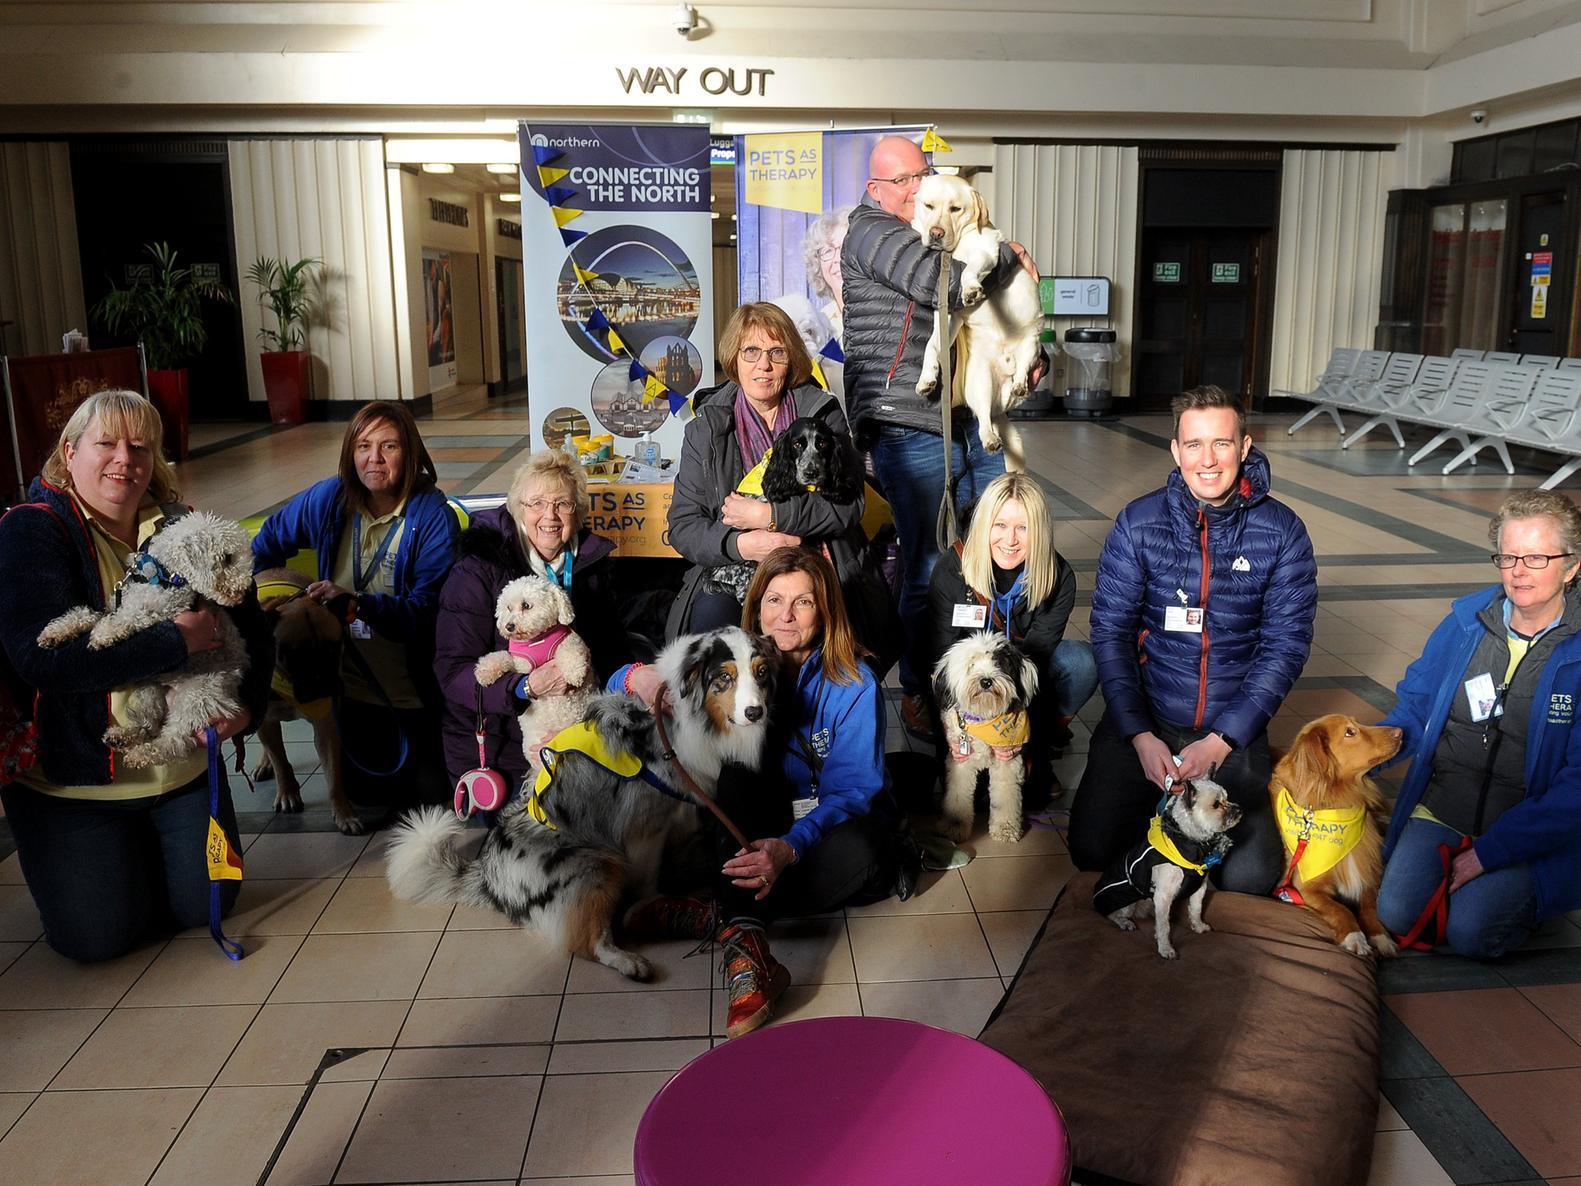 He continued: "By inviting the dogs onto the station we can not only help our customers, we can support and highlight the fantastic work of the charity."